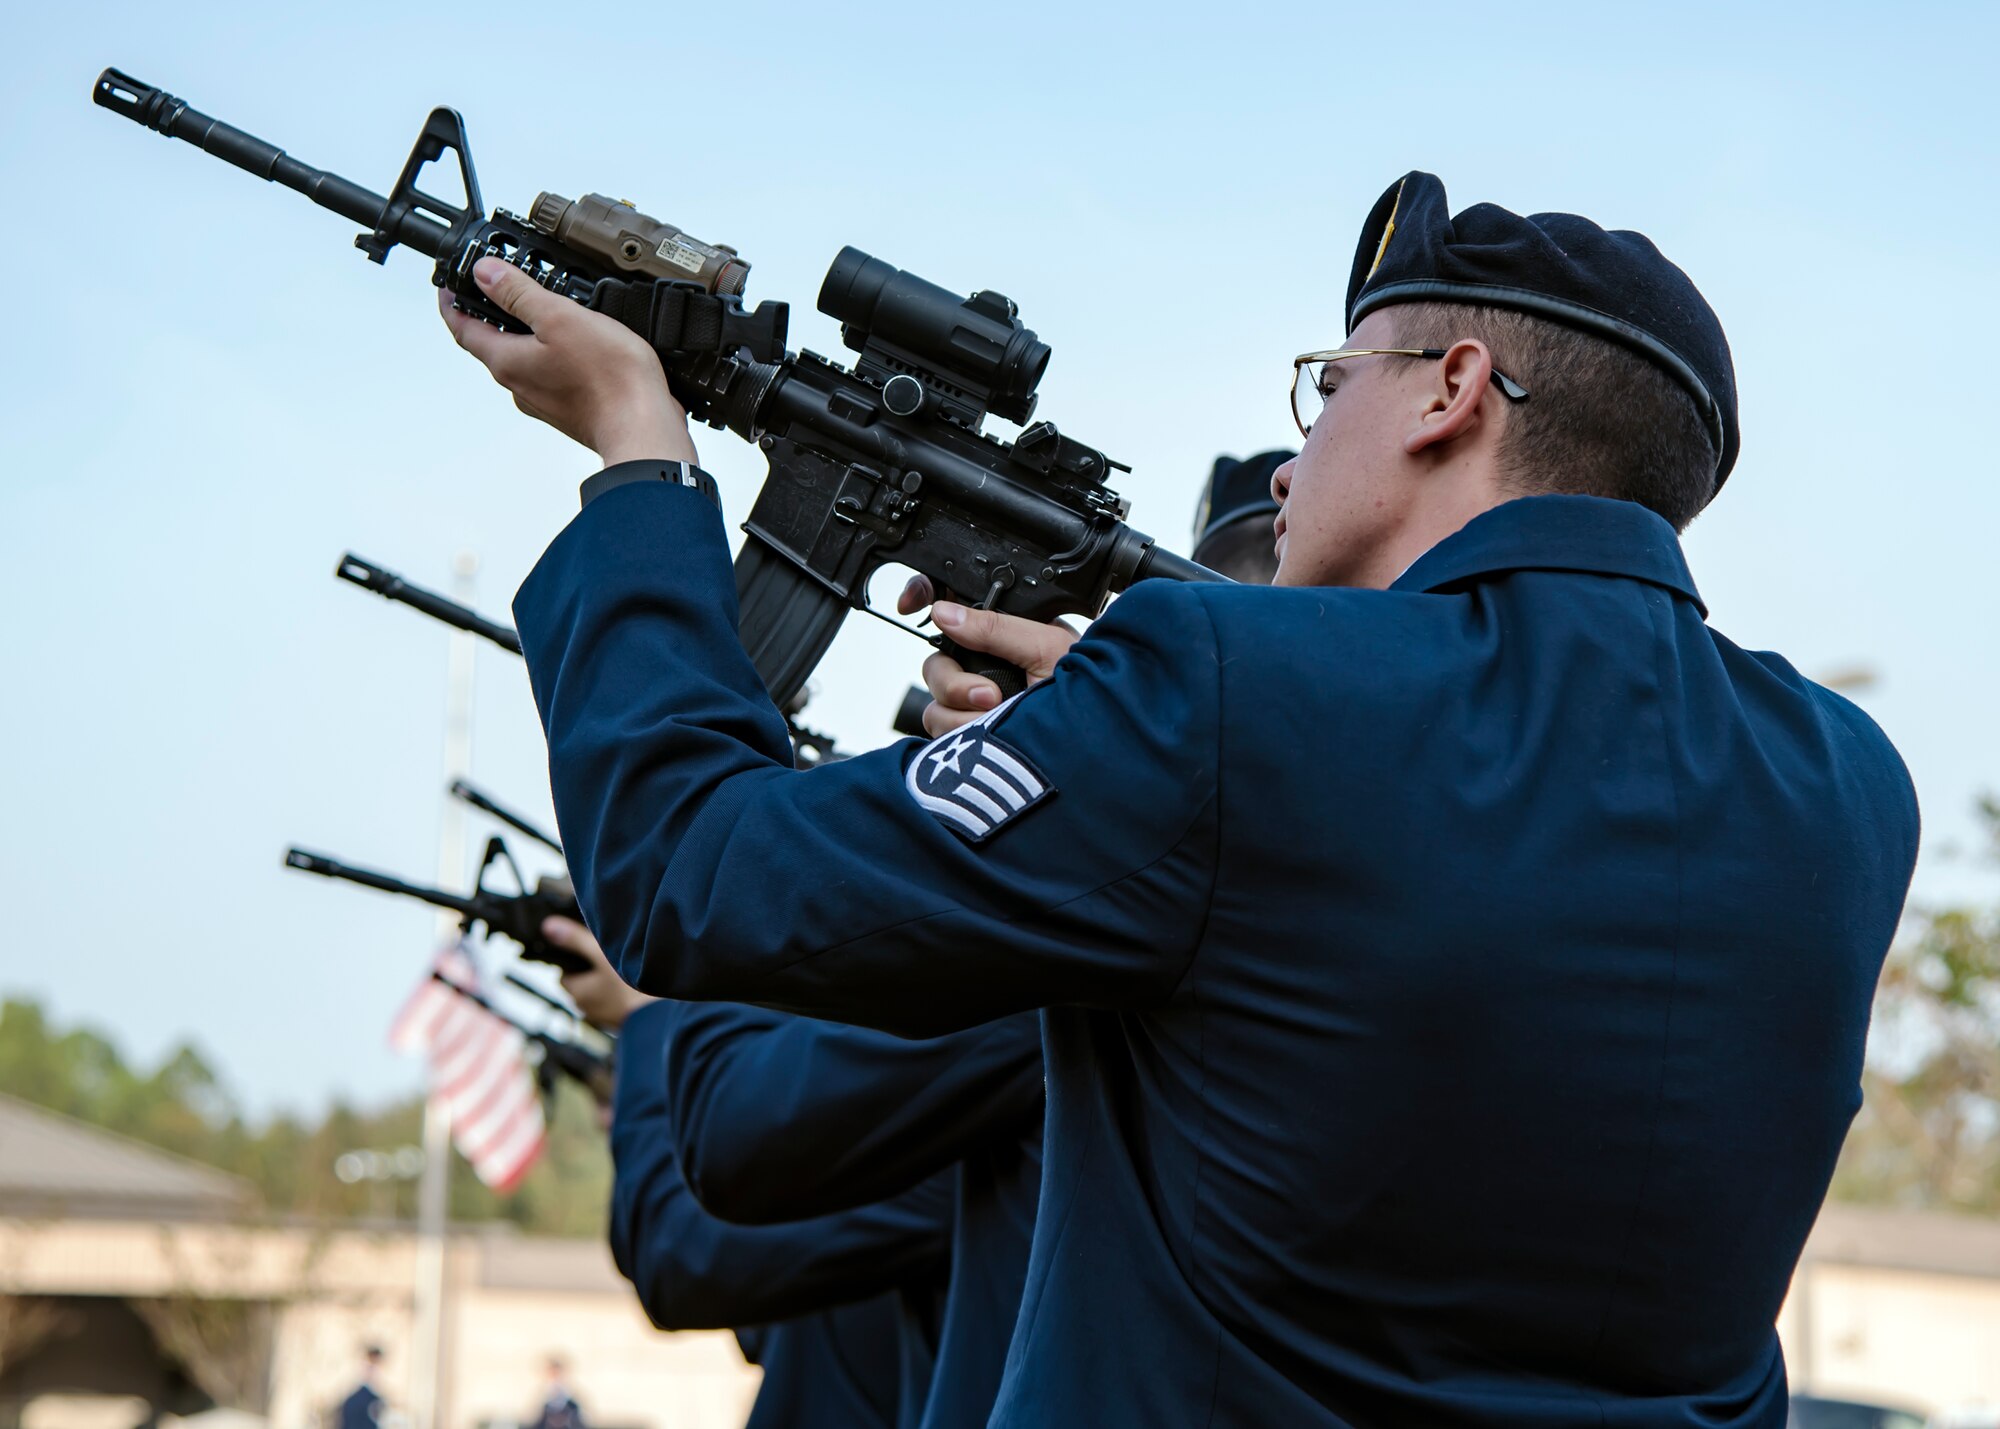 Airmen from the 820th Base Defense Group shoots rounds during a Safeside reunion memorial, Nov.8, 2017, at Moody Air Force Base, Ga. Biennially, the Safeside Association holds a reunion to interact with and honor their past and present comrades from the 820th Base Defense Group. (U.S. Air Force photo by Airman Eugene Oliver)